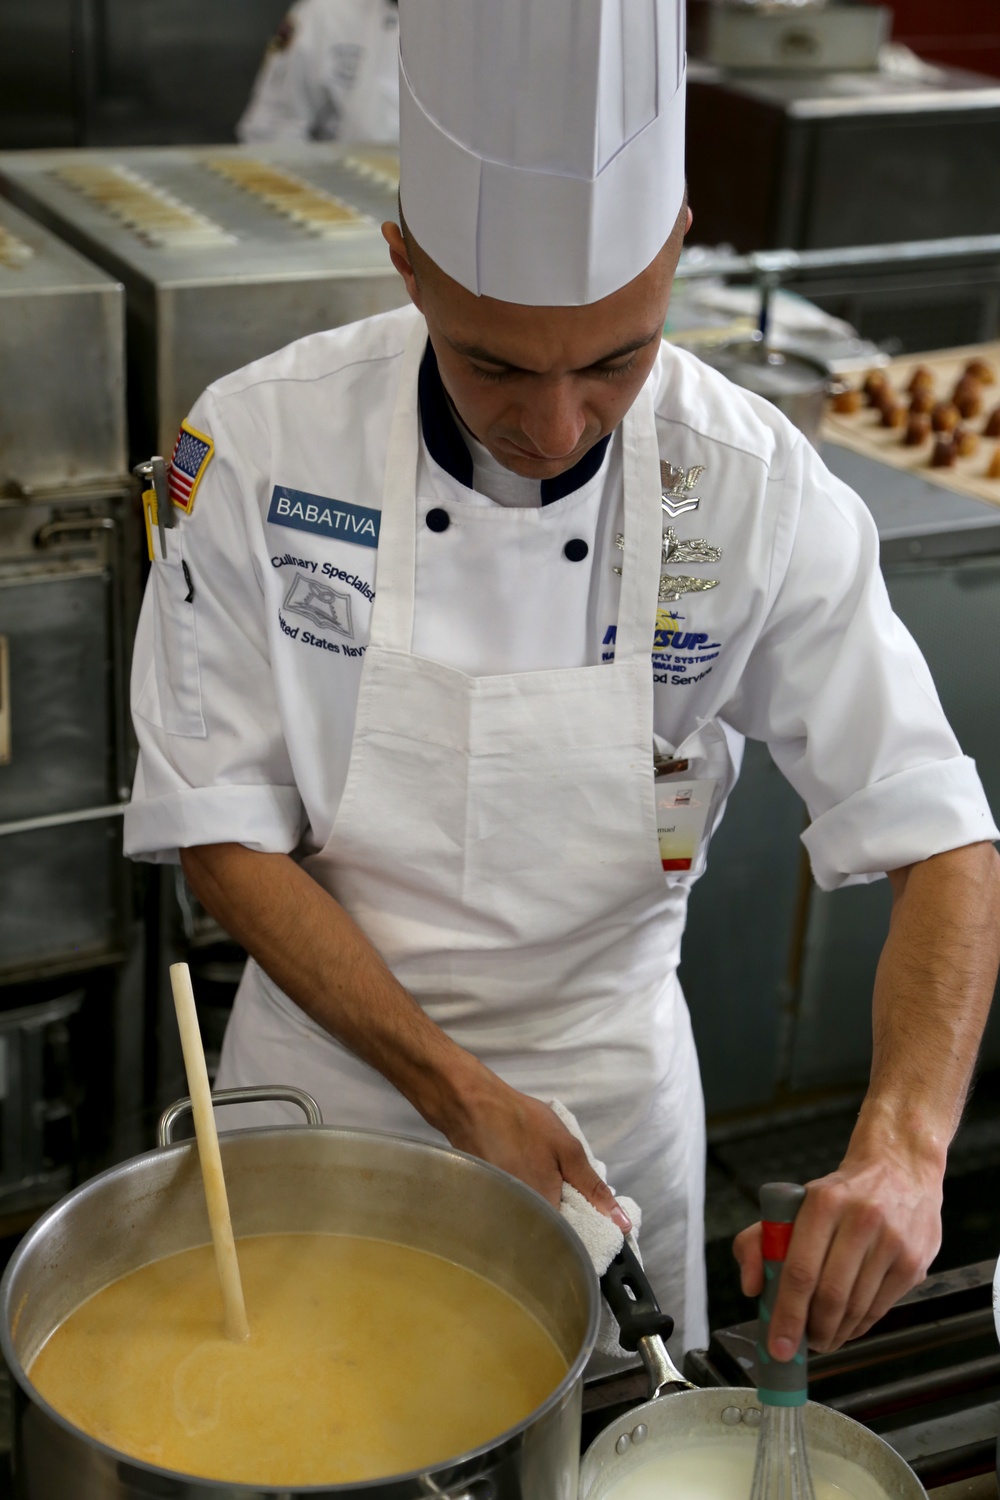 Navy Culinary Specialists sharpen skills at Joint Culinary Training Exercise